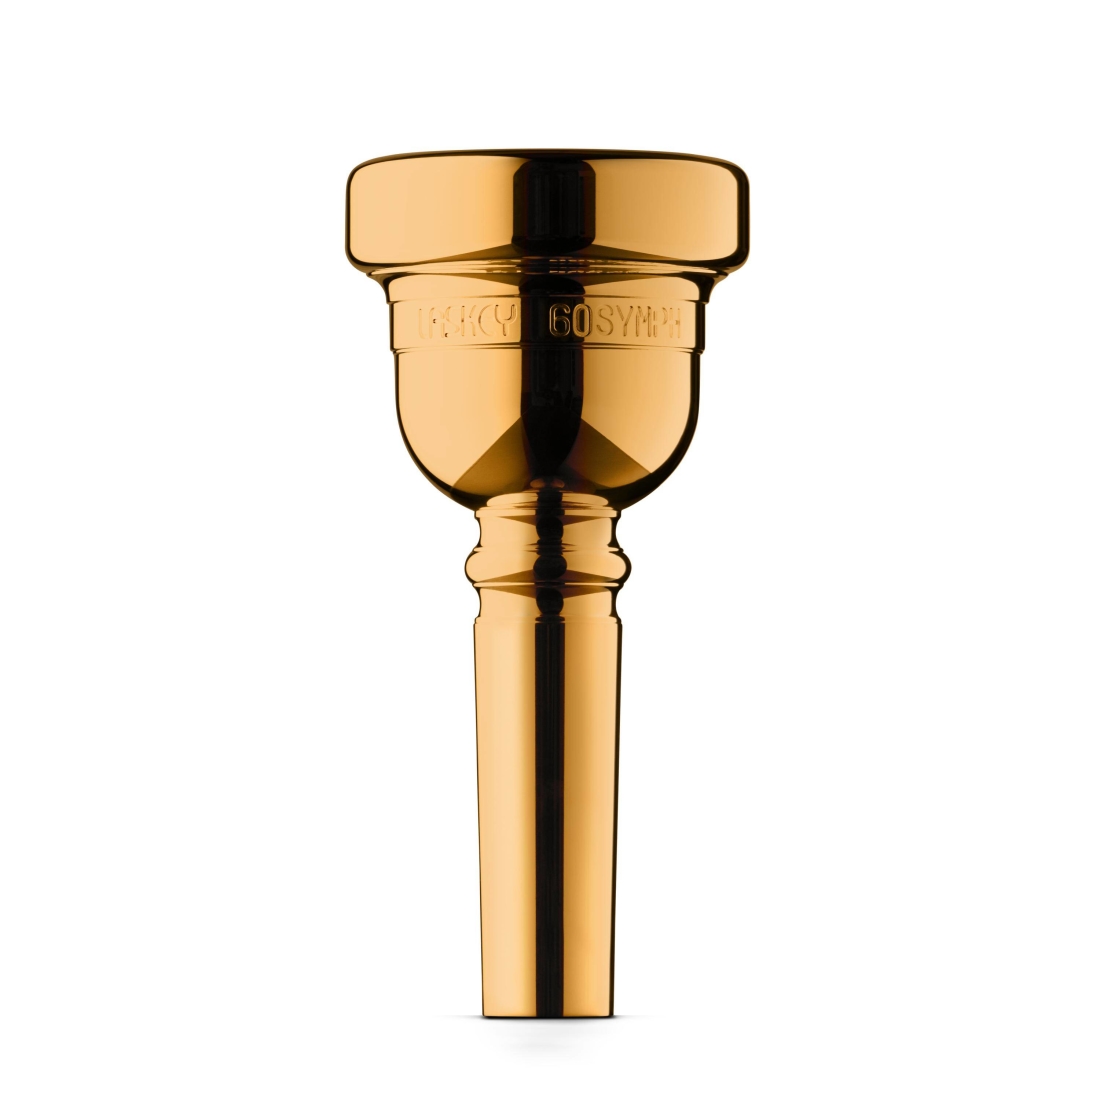 Alessi 60 SYMPH Trombone Mouthpiece - Gold Plated